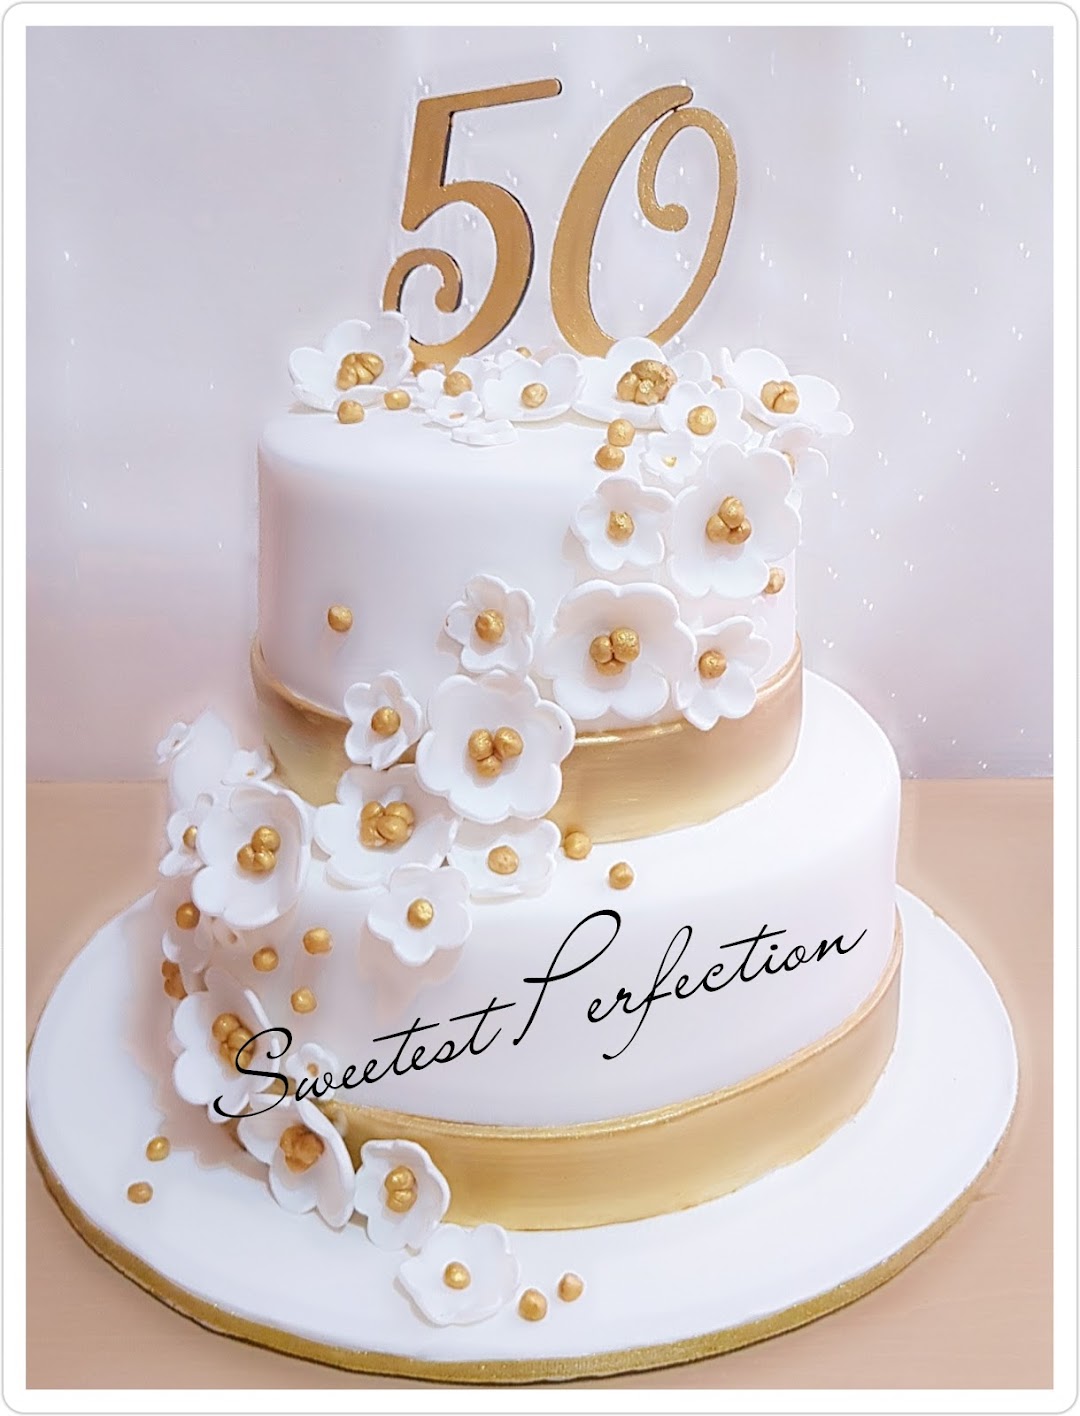 Sweetest Perfection Novelty Cakes and Cake Toppers